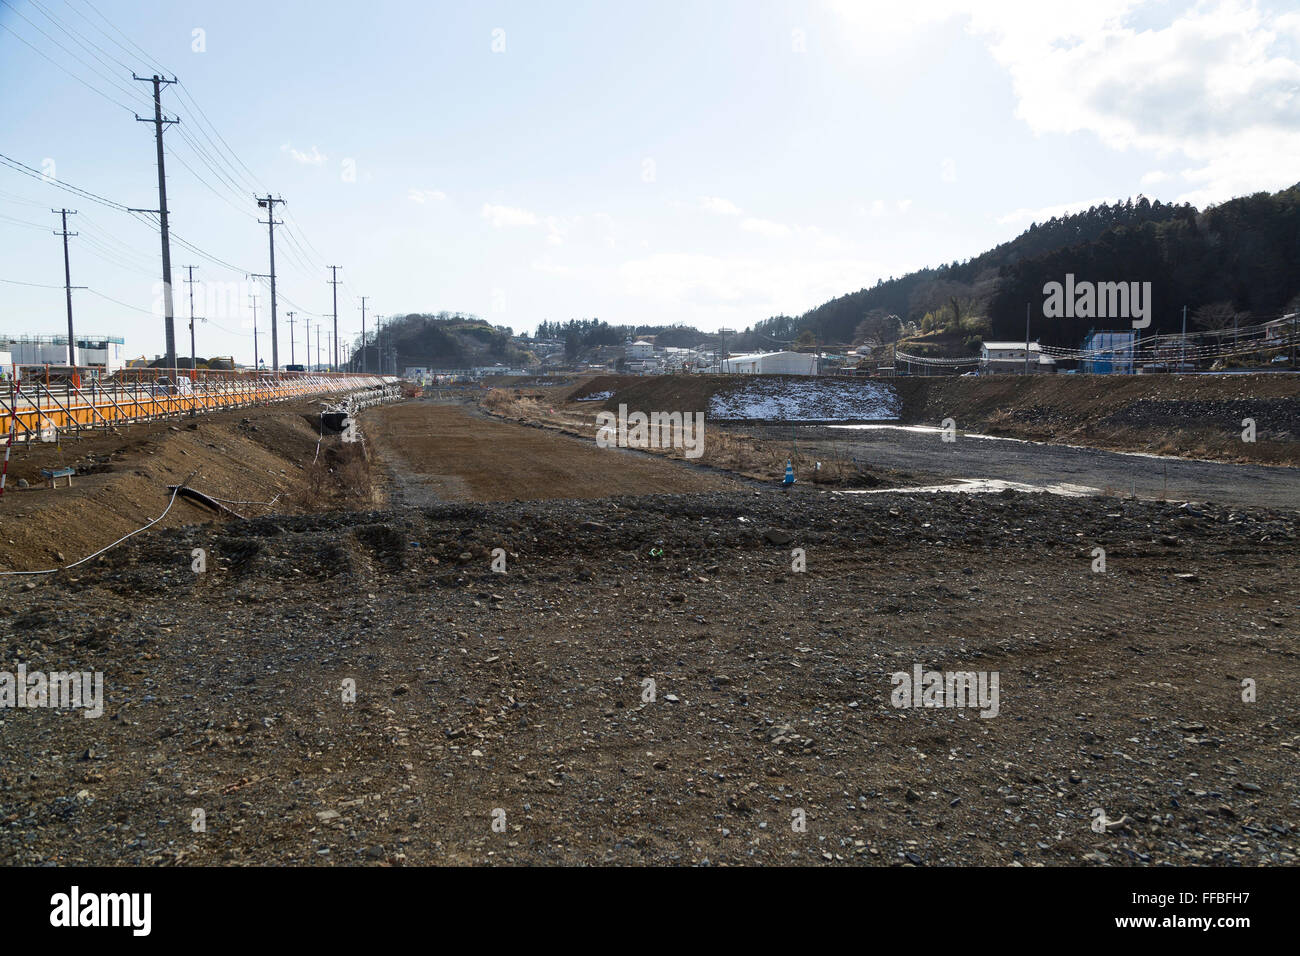 Low lying land in Kesennuma on February 8, 2016, Miyagi Prefecture, Japan. This area used to be occupied by homes and businesses but that changed when the 2011 Tohoku Earthquake and Tsunami struck. As part of the clean up process the 330-ton fishing vessel Kyotoku Maru No. 18 that was swept half a kilometre inland to here was dismantled and removed. © Rodrigo Reyes Marin/AFLO/Alamy Live News Stock Photo